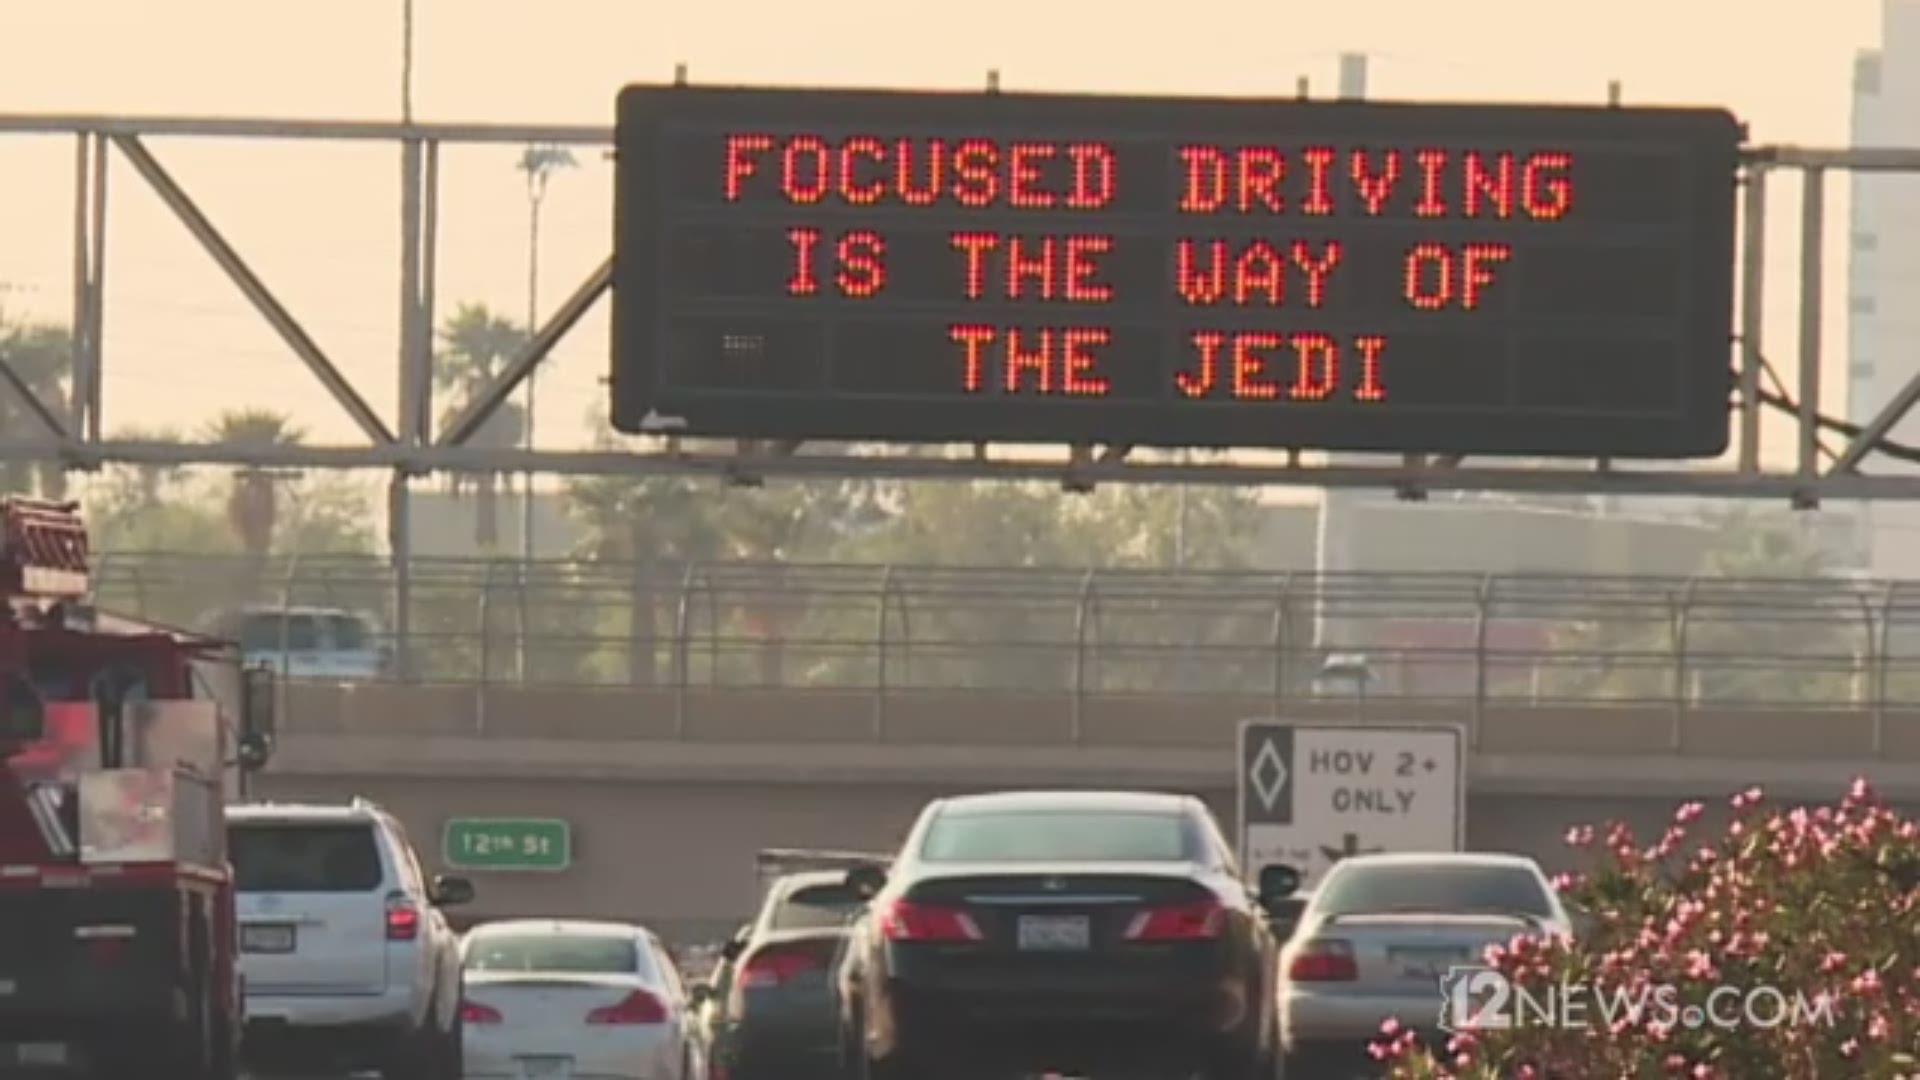 Like those quirky ADOT freeway signs? Here's your chance to create one